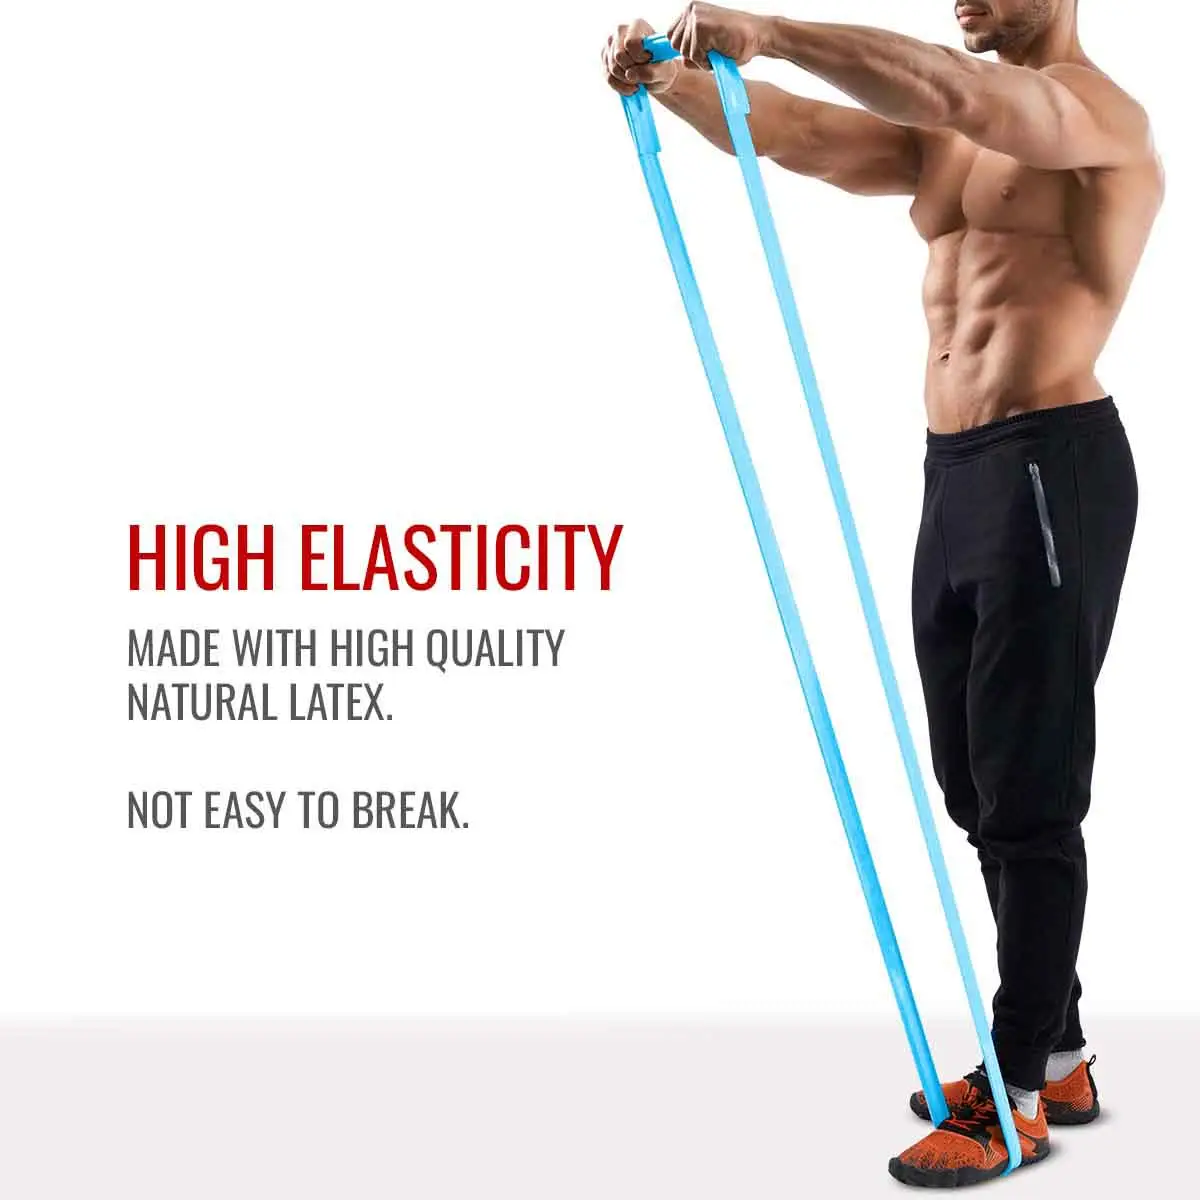 Durafit Resistance Band Orlb3 with High Elasticity